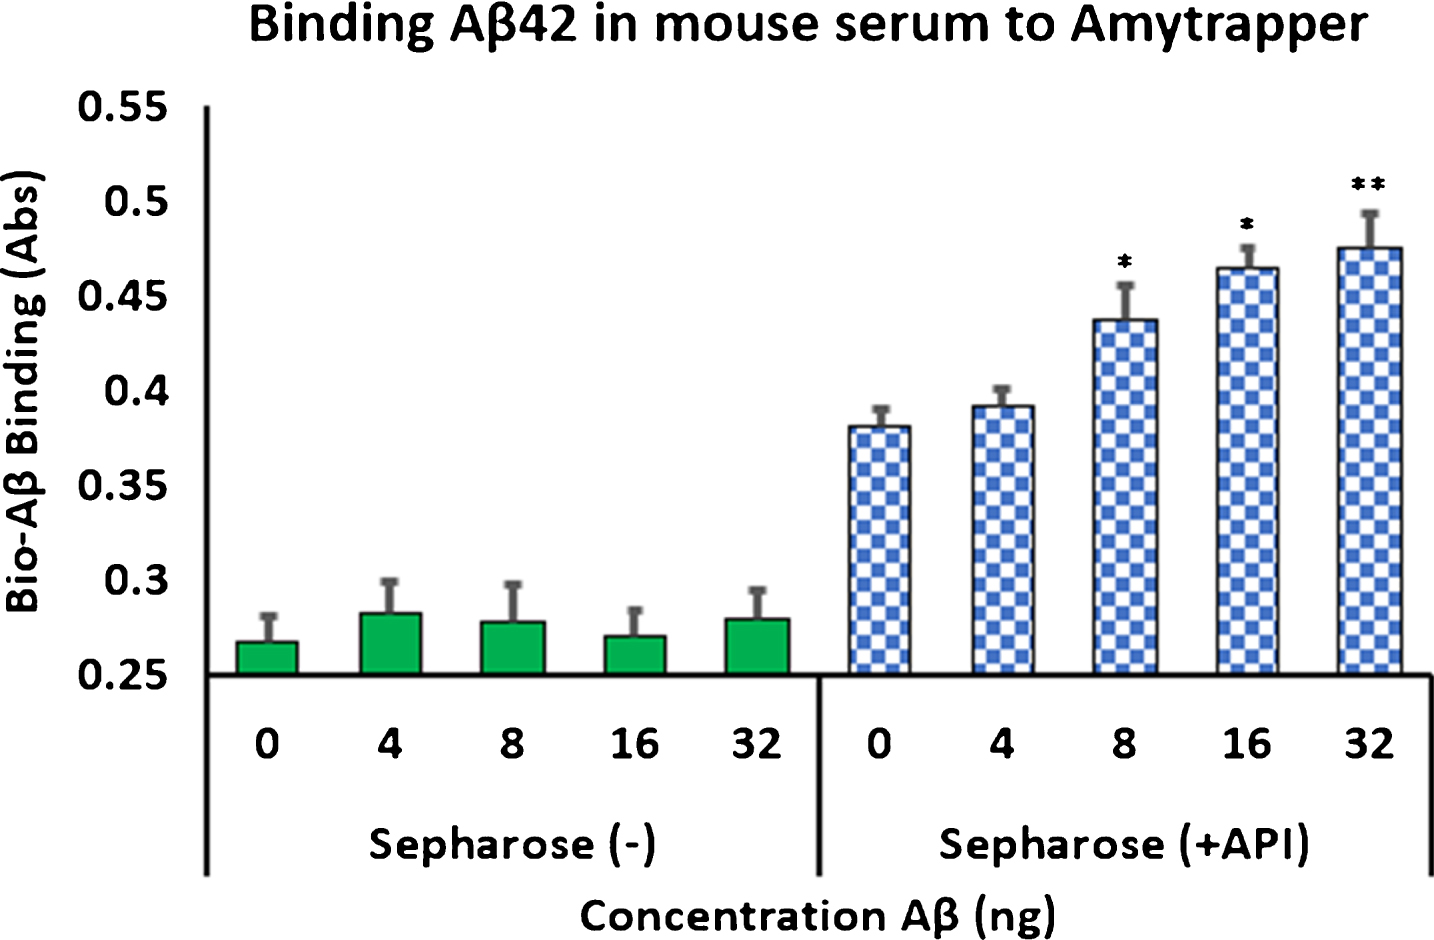 Binding of biotinylated Aβ42 to Amytrapper in mouse serum spiked with bio-Aβ42. Sepharose (–) act as a negative control. Values are expressed in absorbance units presented as Mean±SEM from triplicate measurements. Student’s t-test was used to determine significance. *p < 0.05, **p < 0.01.